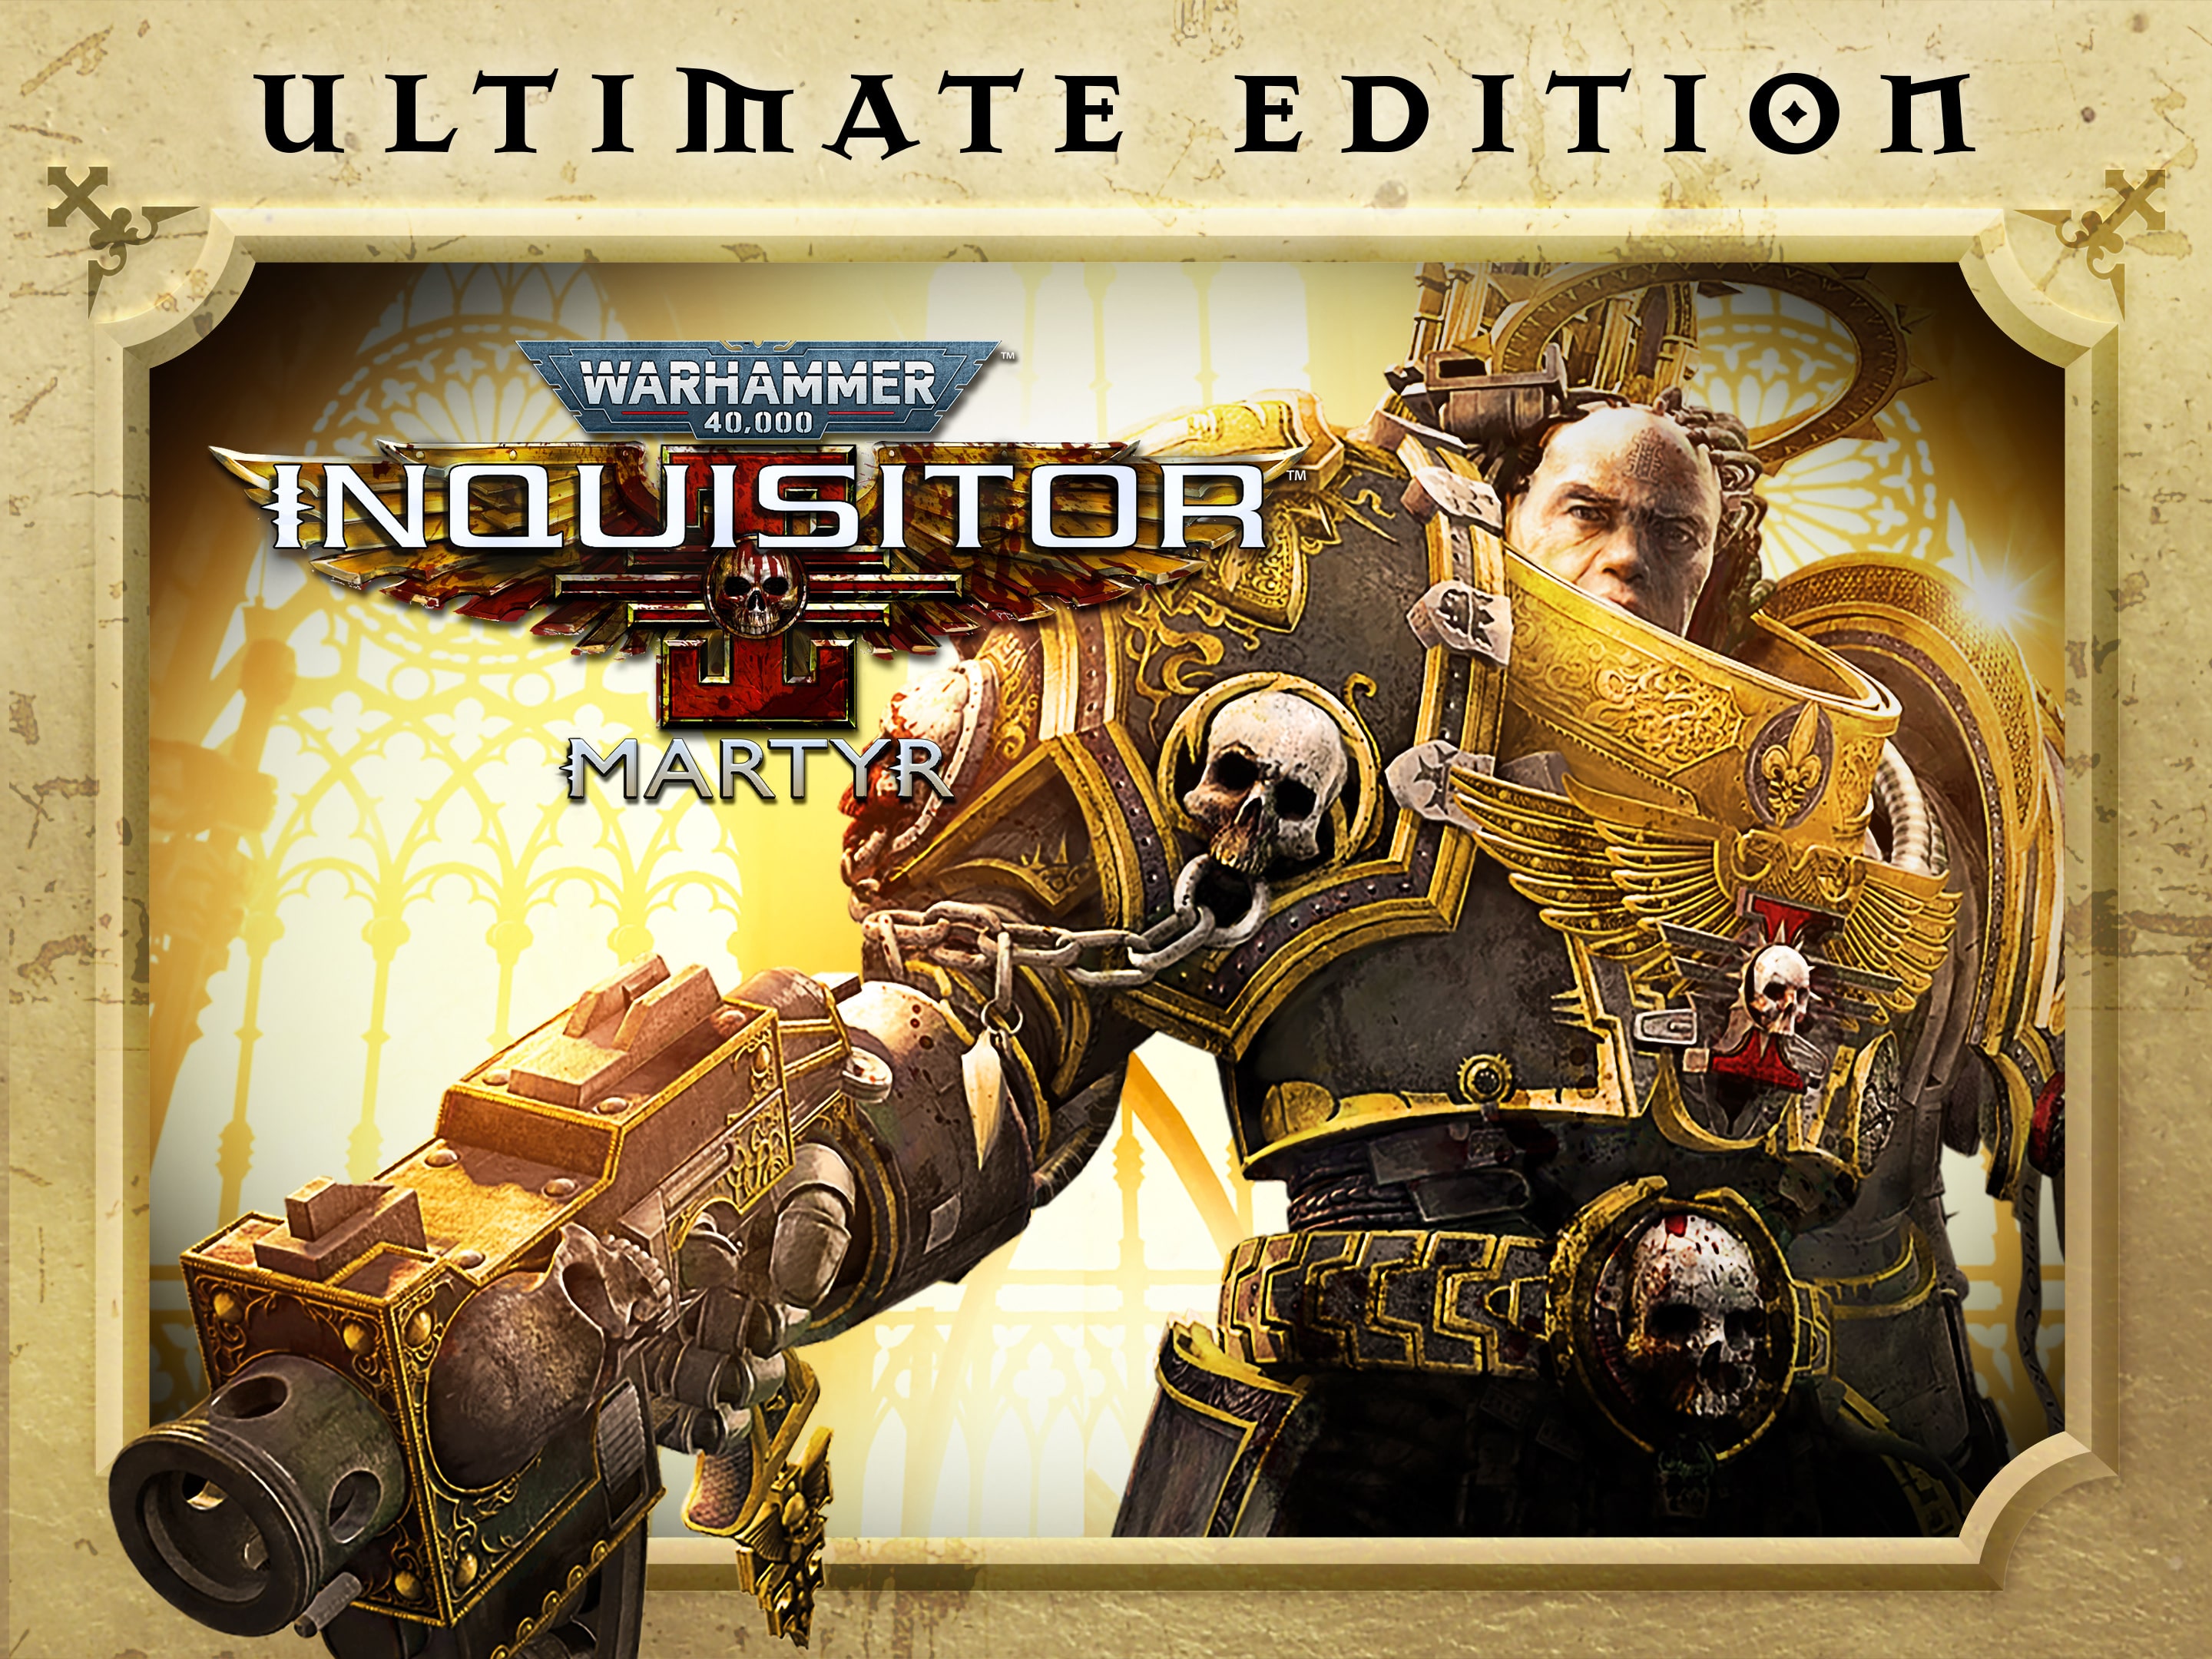 Warhammer ps4. Inquisitor Martyr ps4. Warhammer 40000 ps4. Warhammer 40,000 Inquisitor - Martyr ps4 обложка. Warhammer 40,000: Inquisitor - Martyr complete collection.